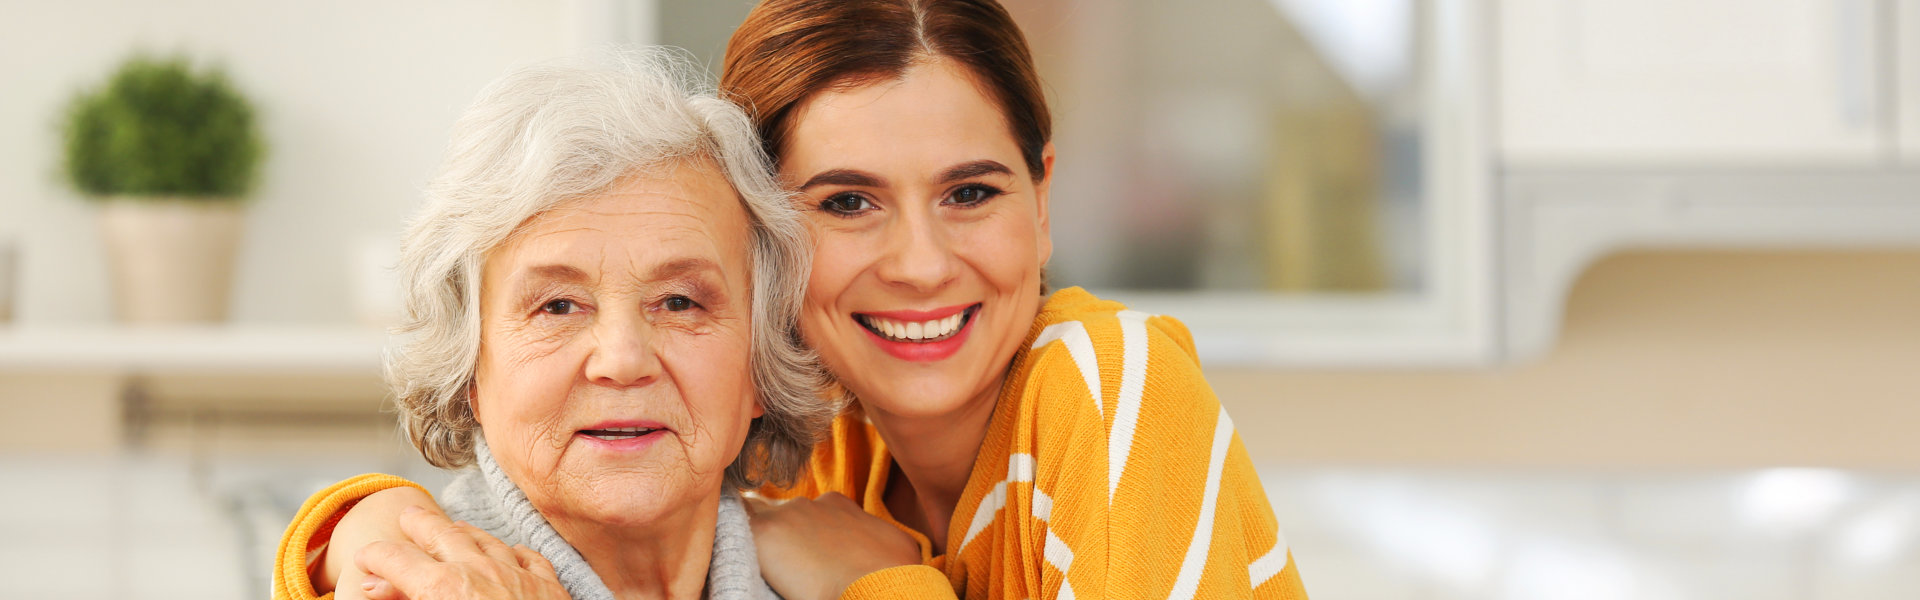 elderly woman and woman smiling